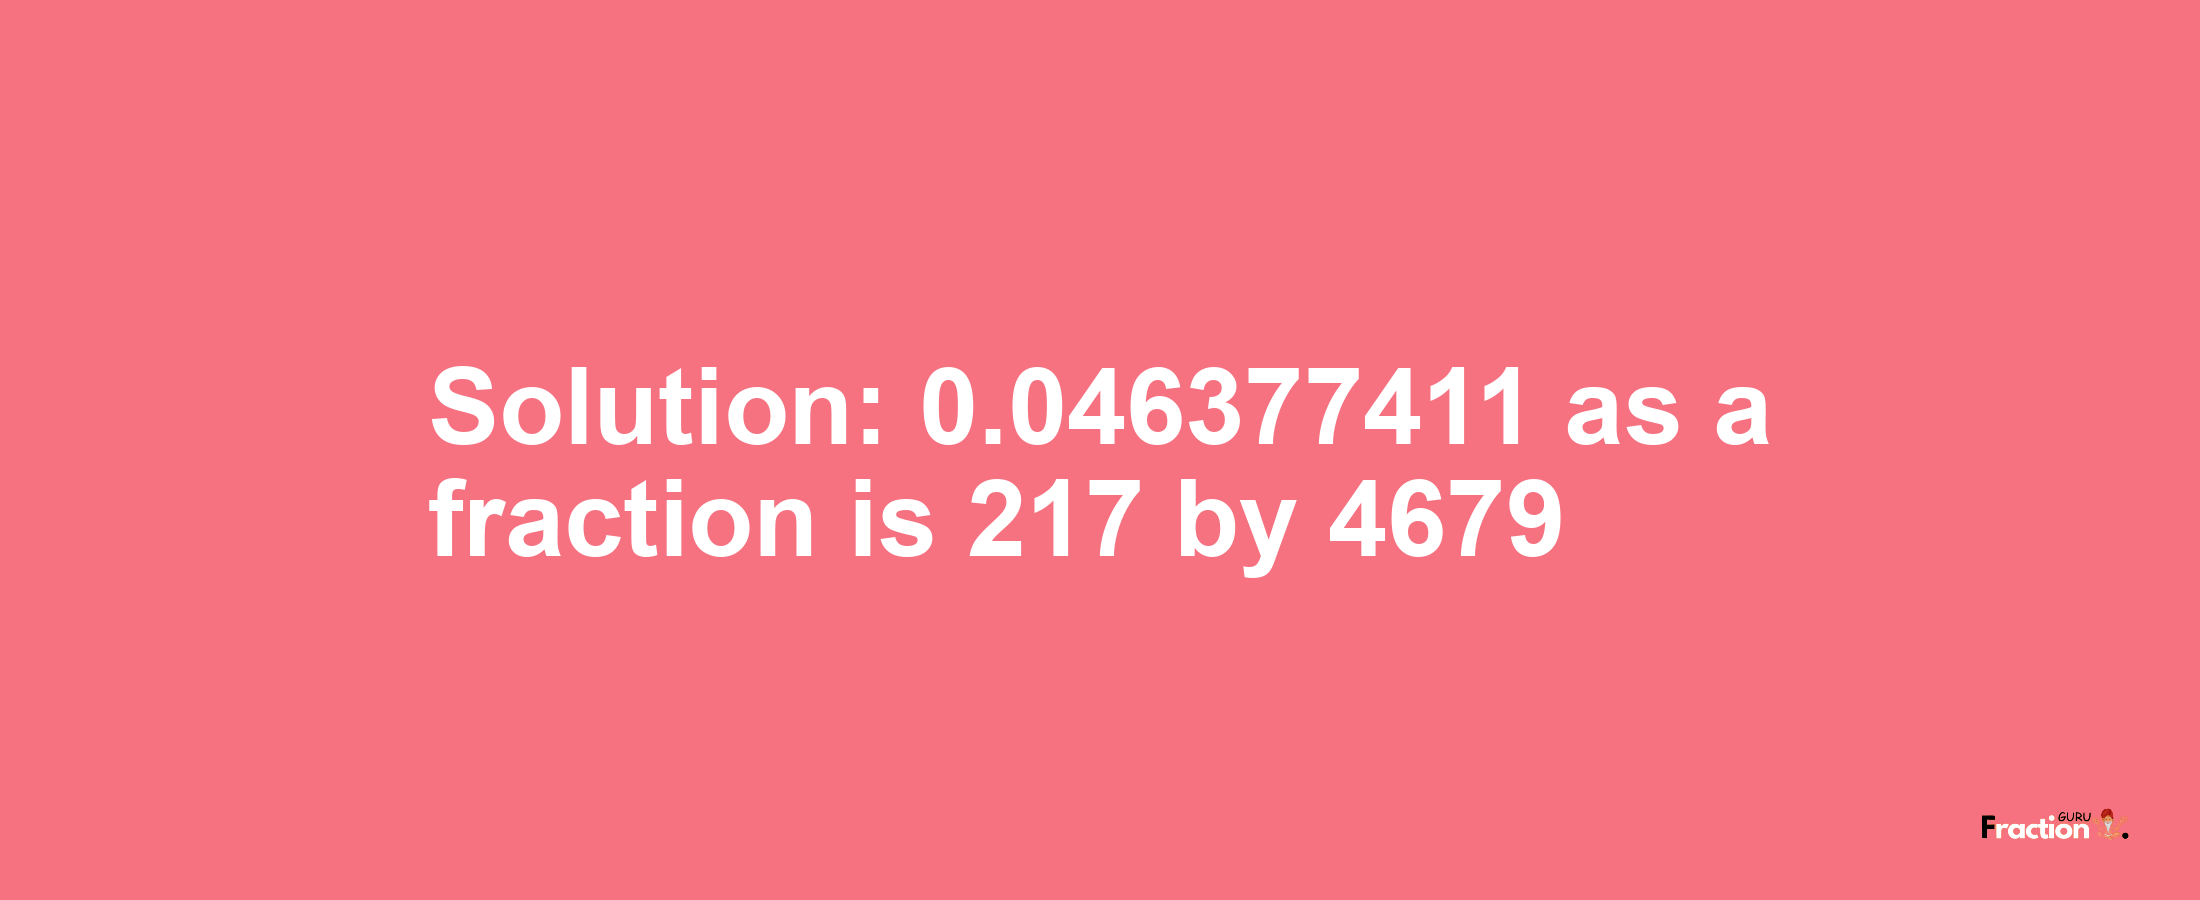 Solution:0.046377411 as a fraction is 217/4679